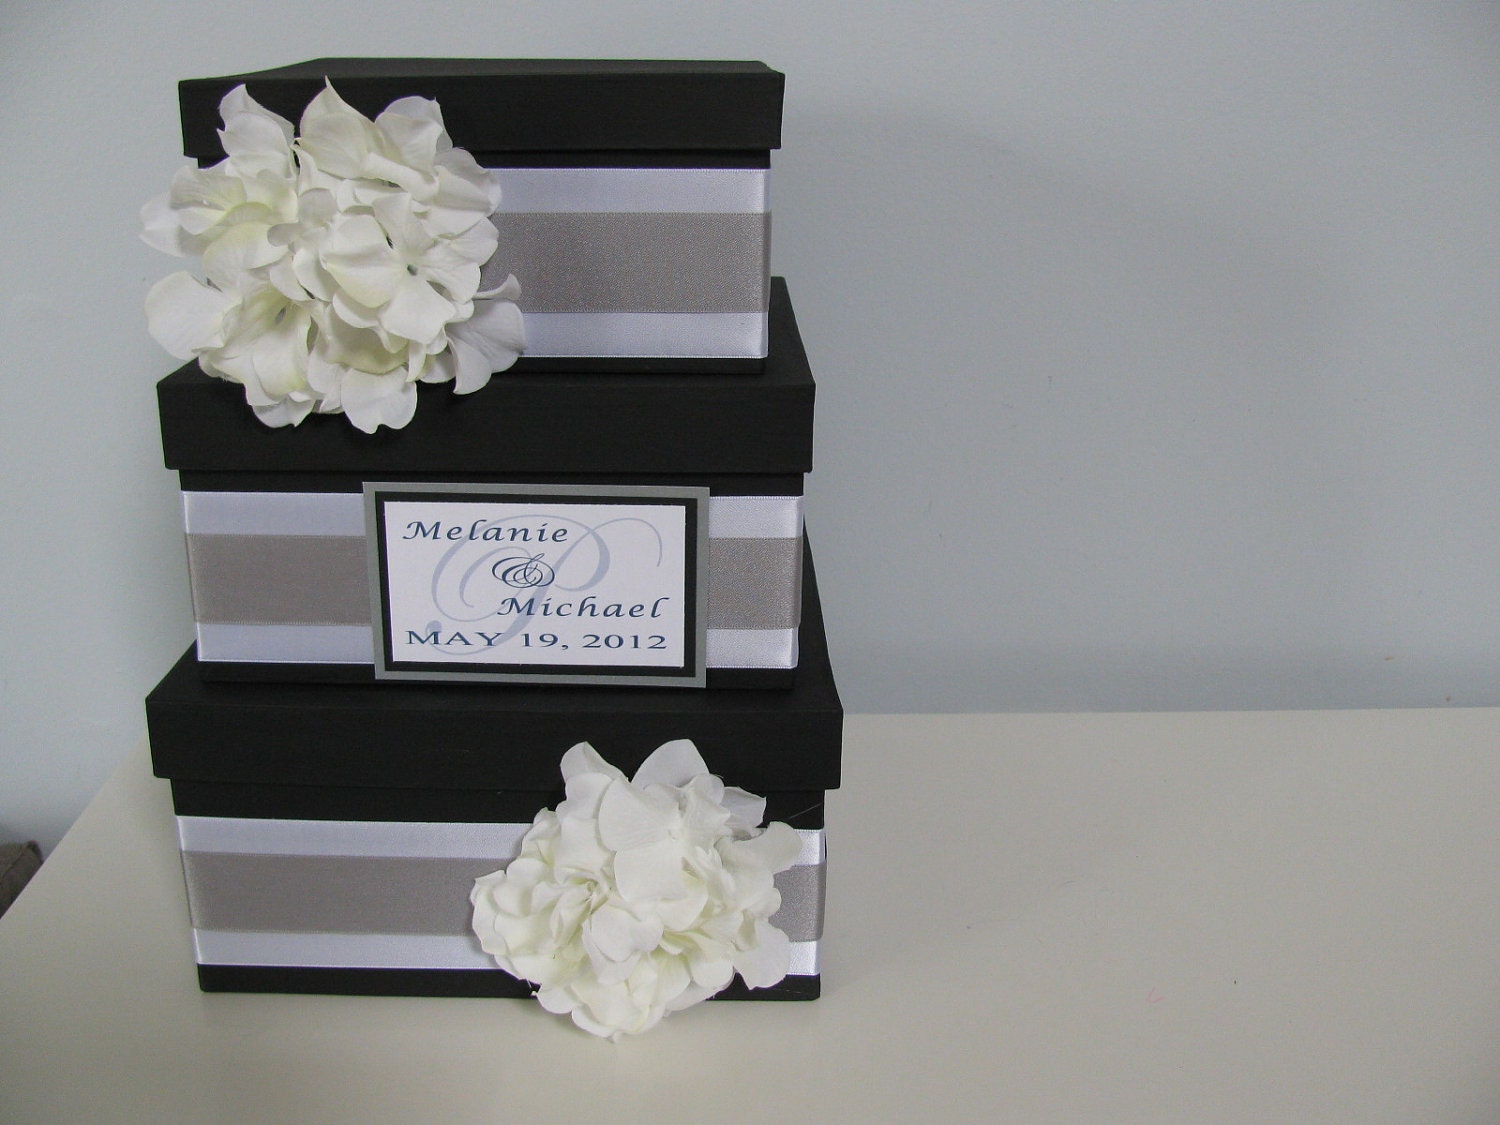 3 tiered Modern Wedding Card Box with personalized tag You Customize Colors and Flowers- shown black, silver and white with hydrangeas